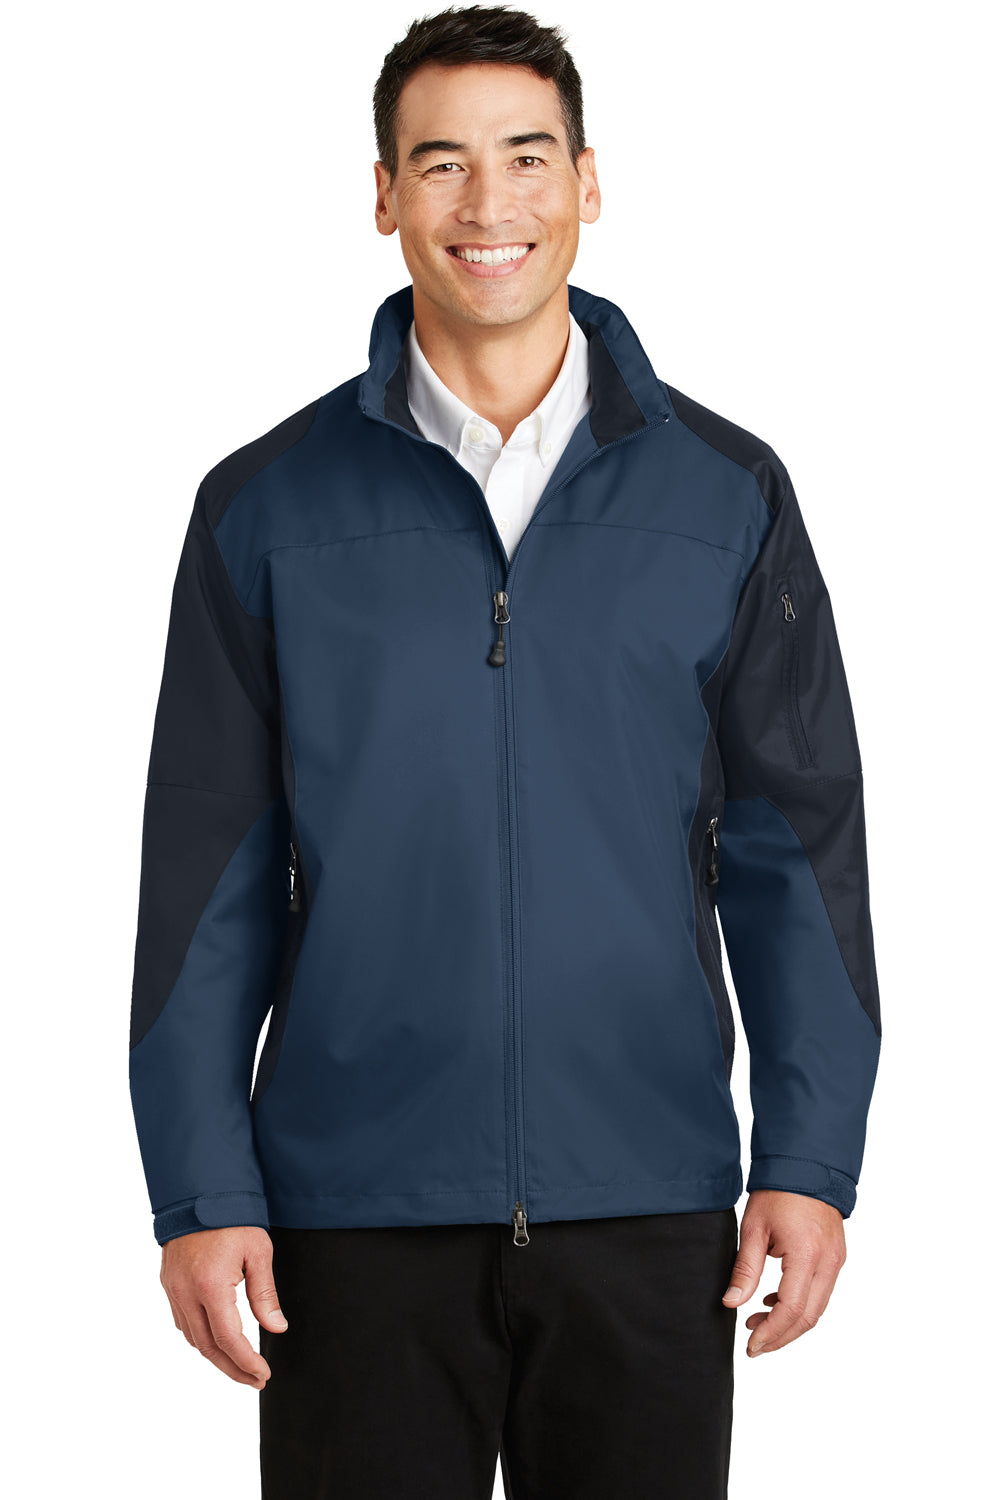 Port Authority J768 Mens Endeavor Wind & Water Resistant Full Zip Hooded Jacket Insignia Blue/Navy Blue Front